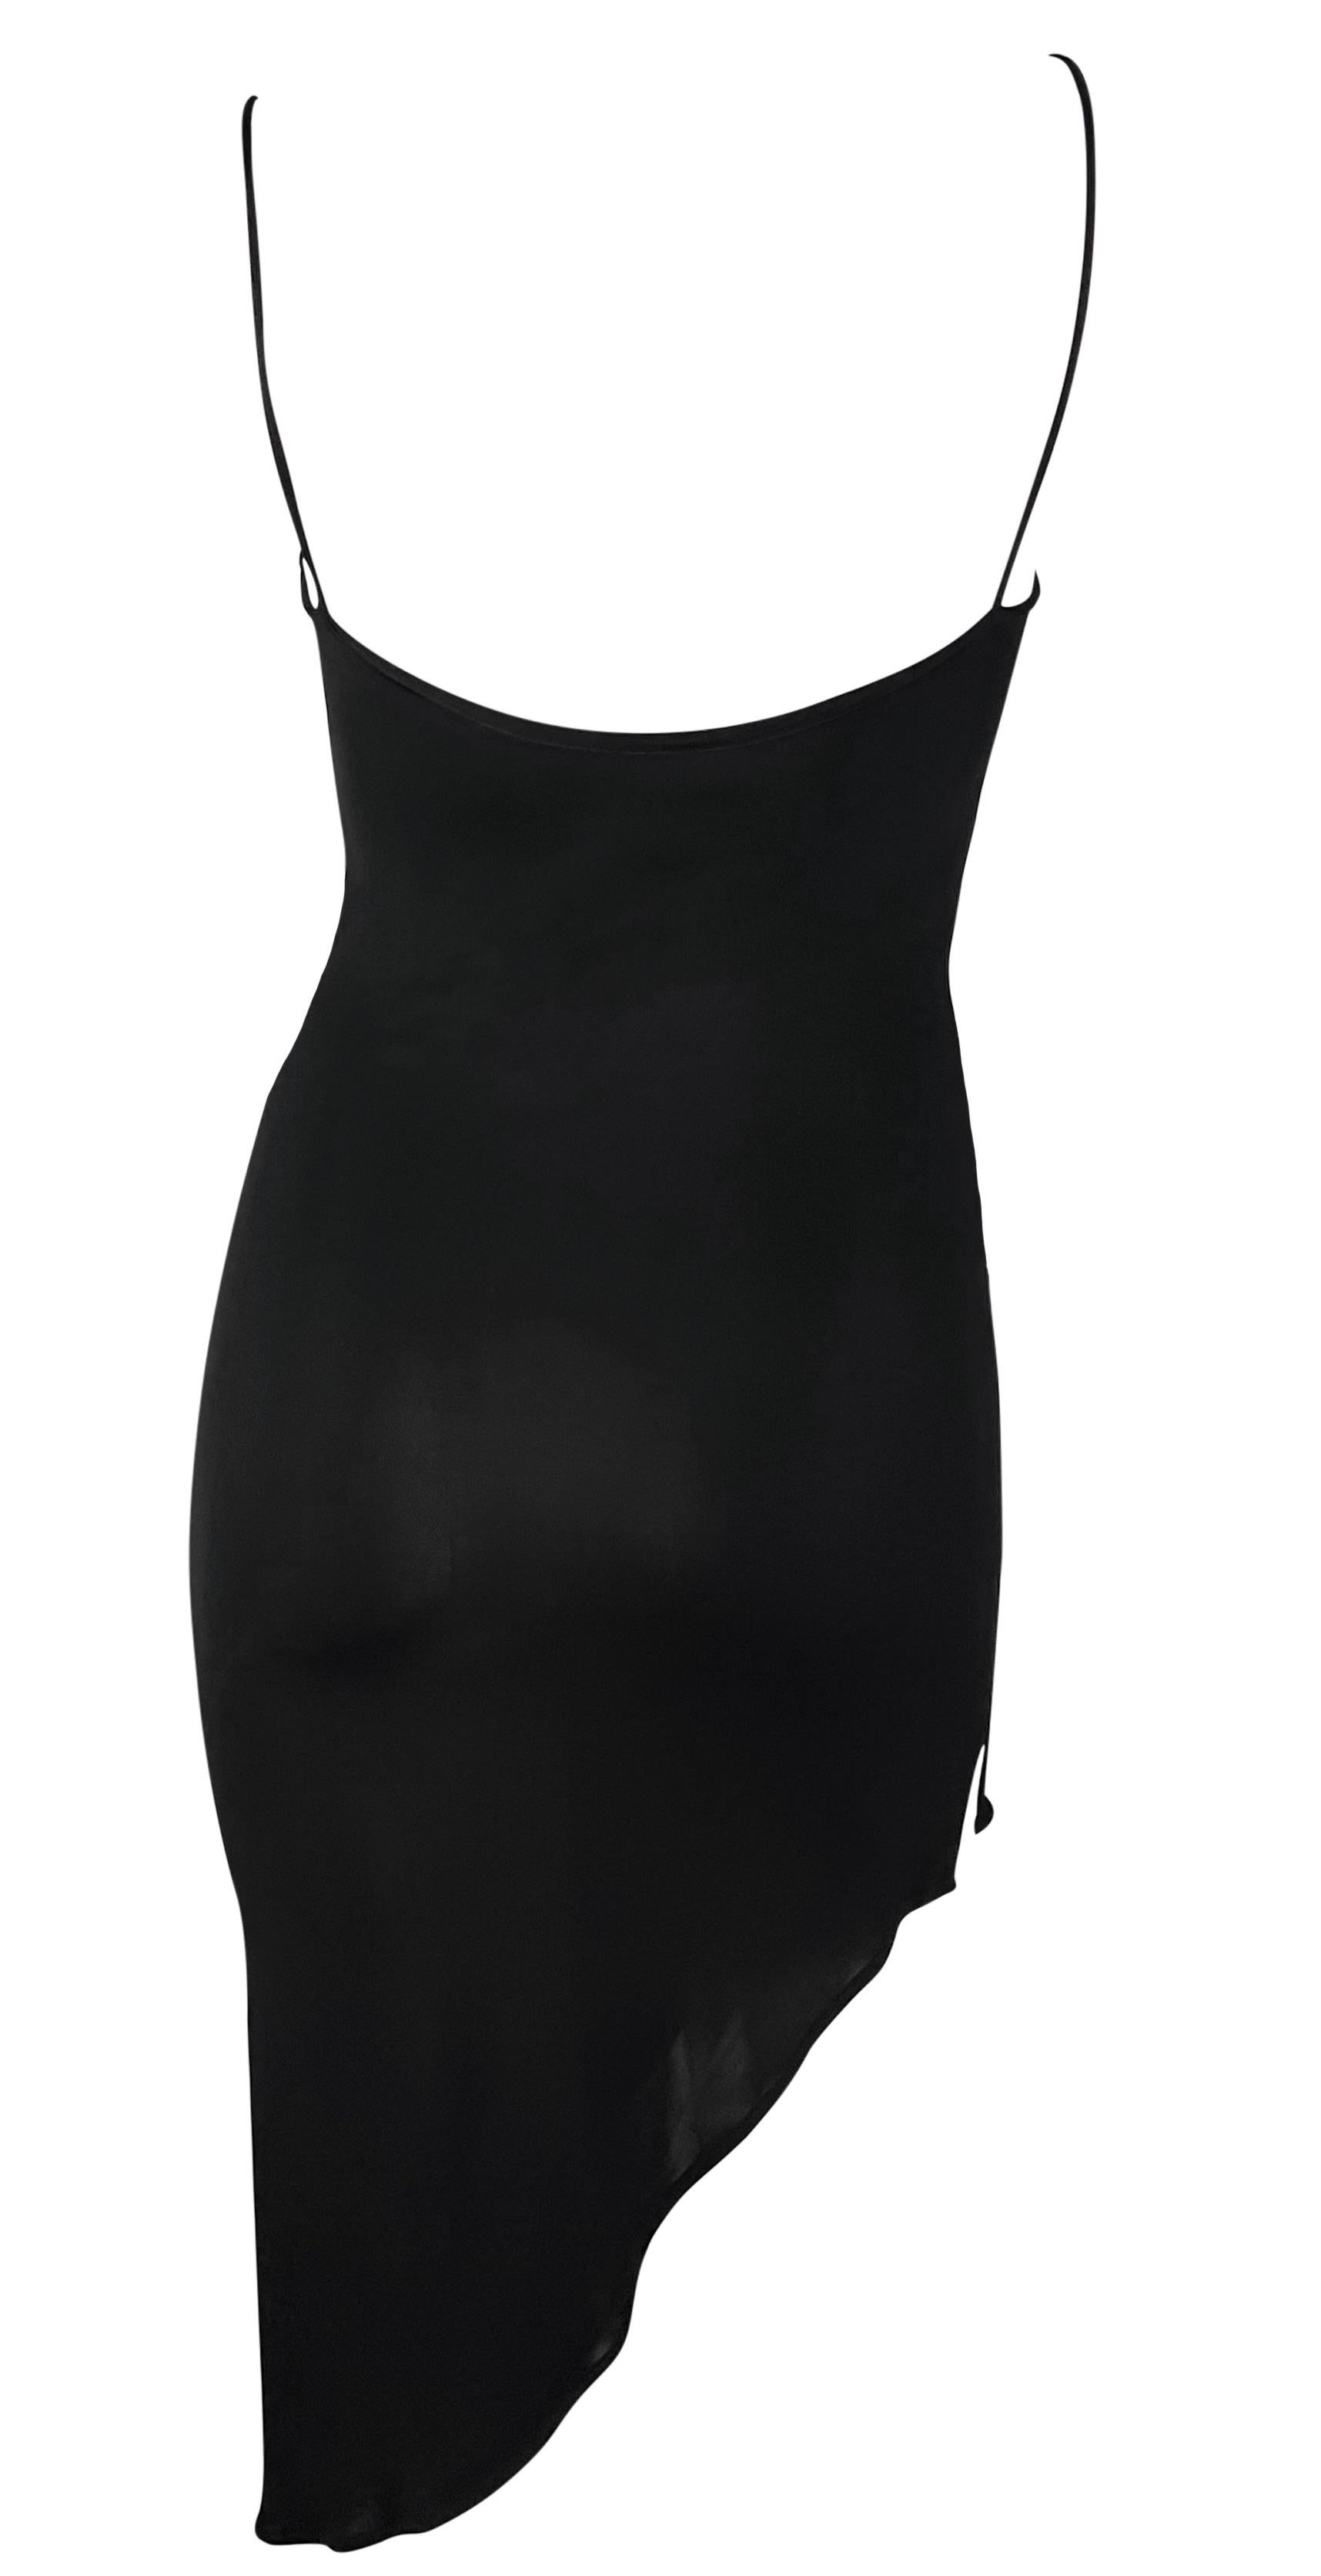 Late 1990s Yigal Azrouël Black Asymmetric Hem Bodycon Viscose Dress In Excellent Condition For Sale In West Hollywood, CA